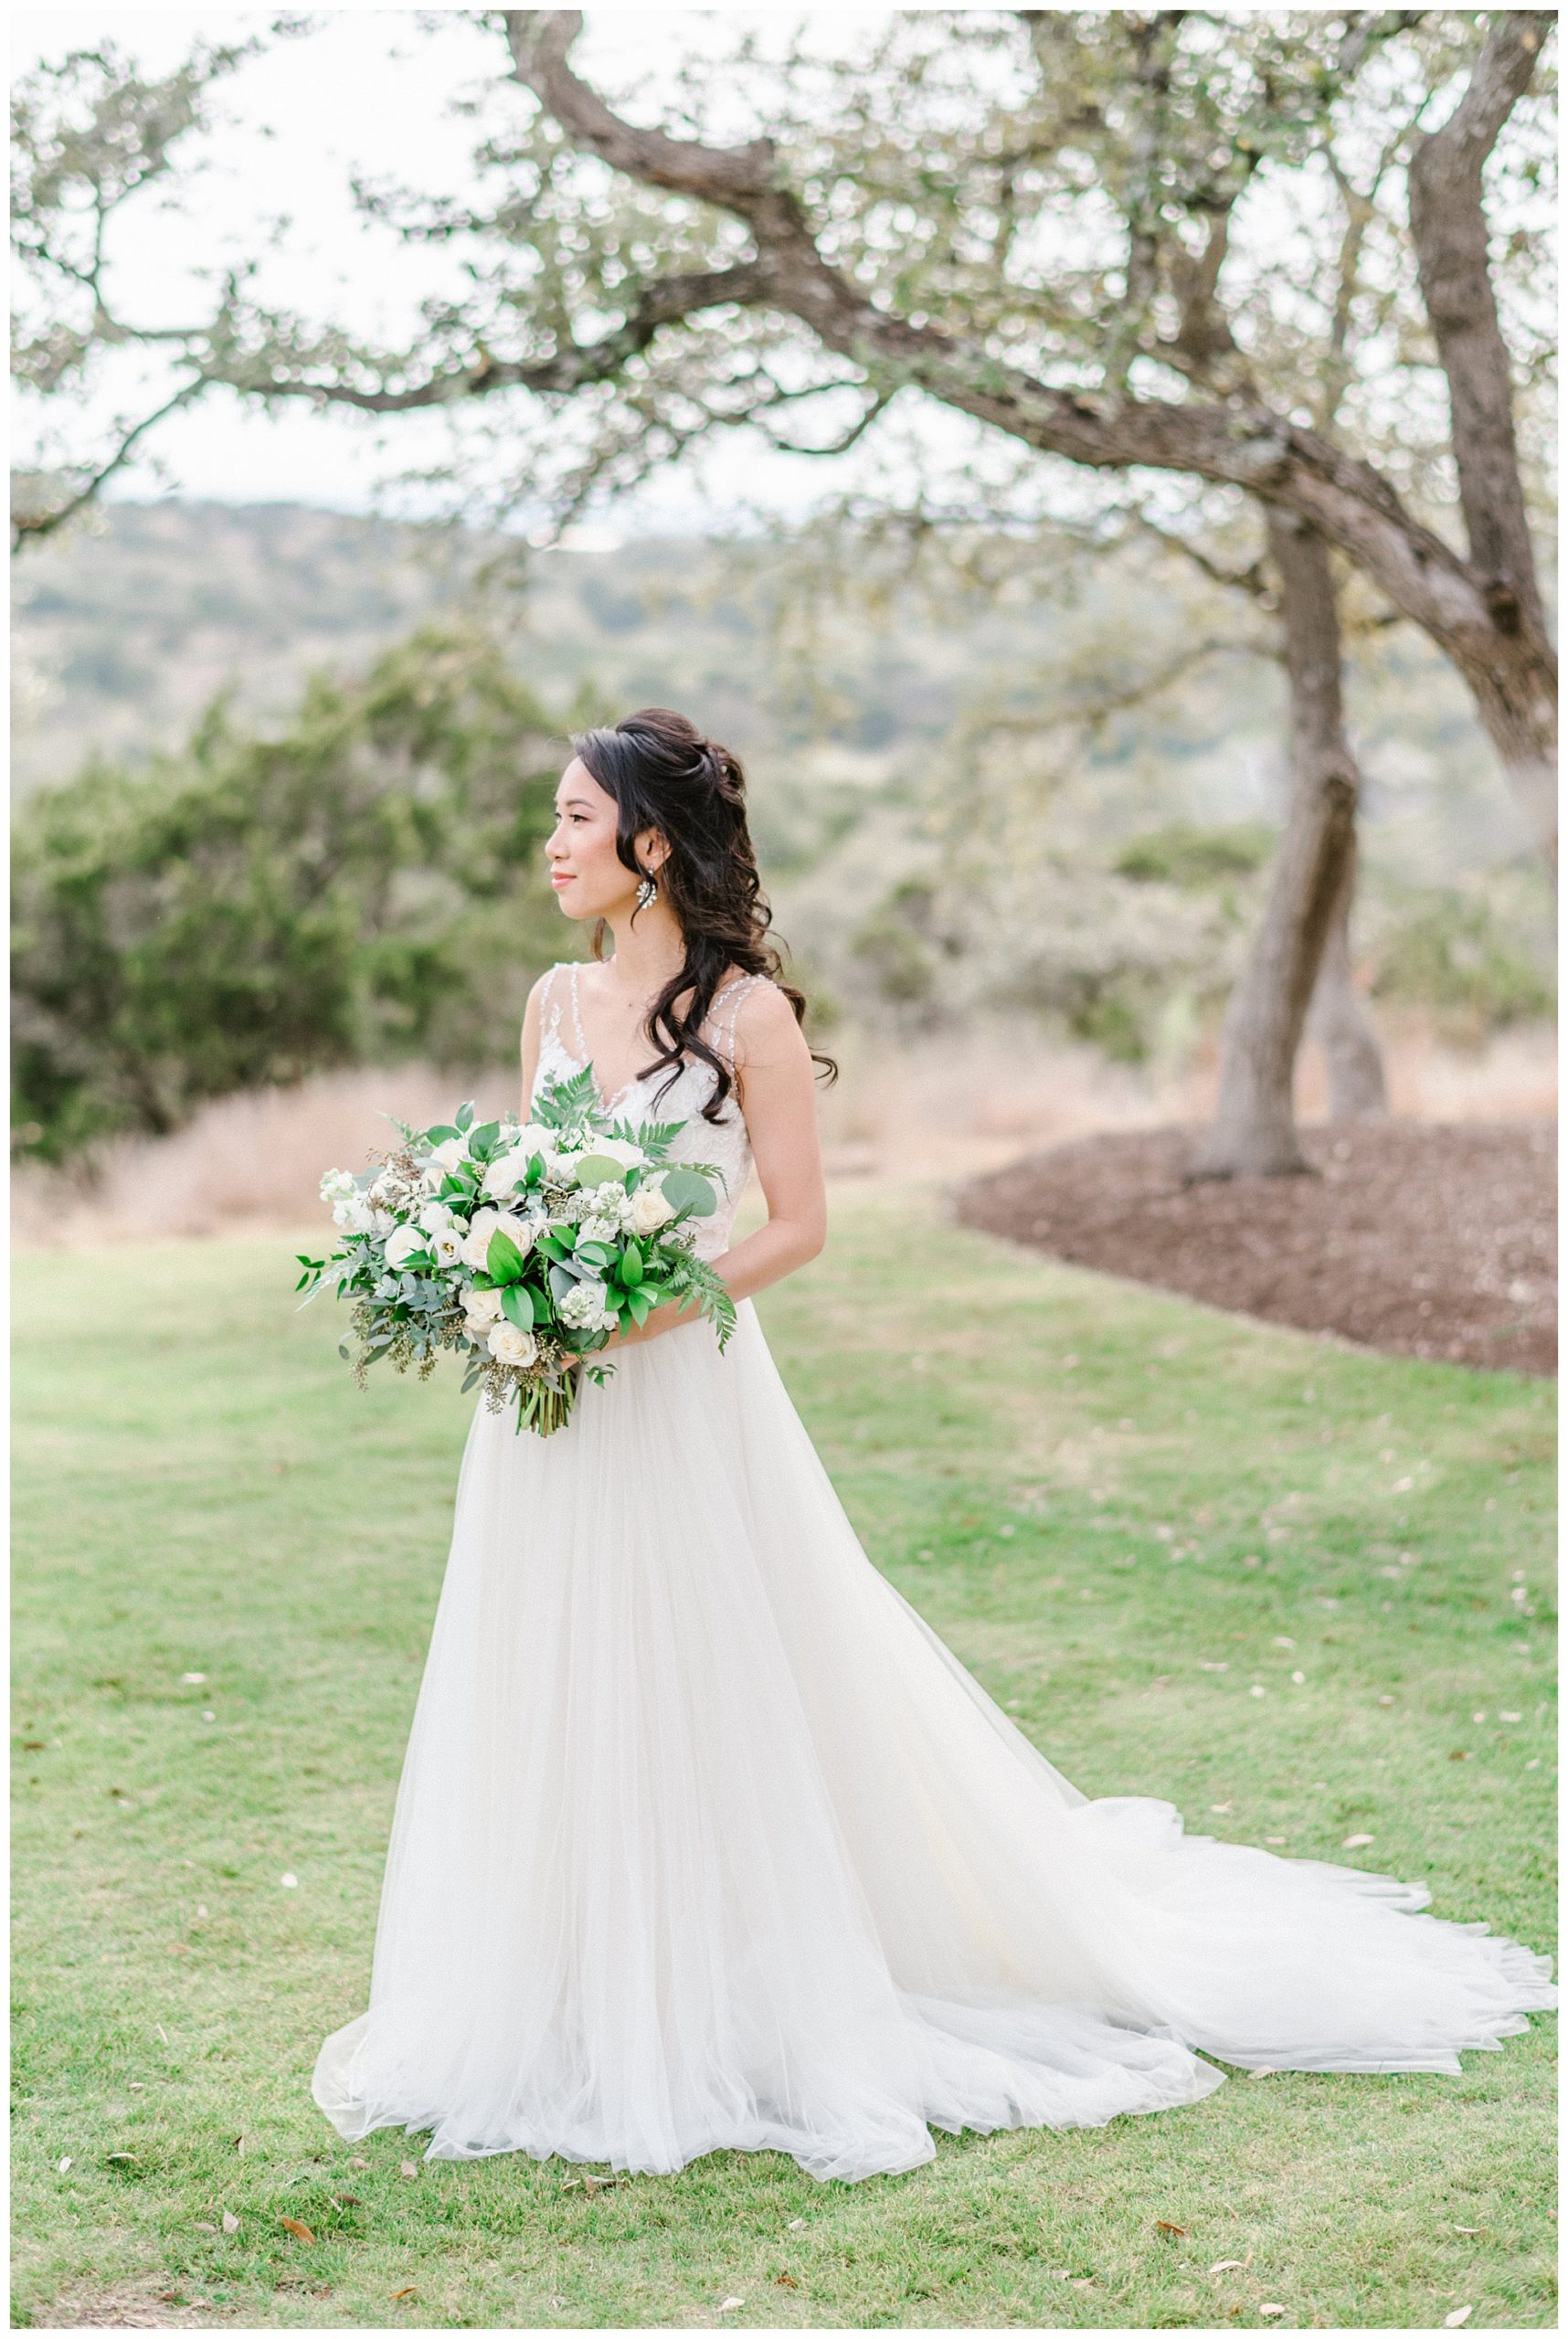 Gorgeous Bride holding her Classic White Bouquet